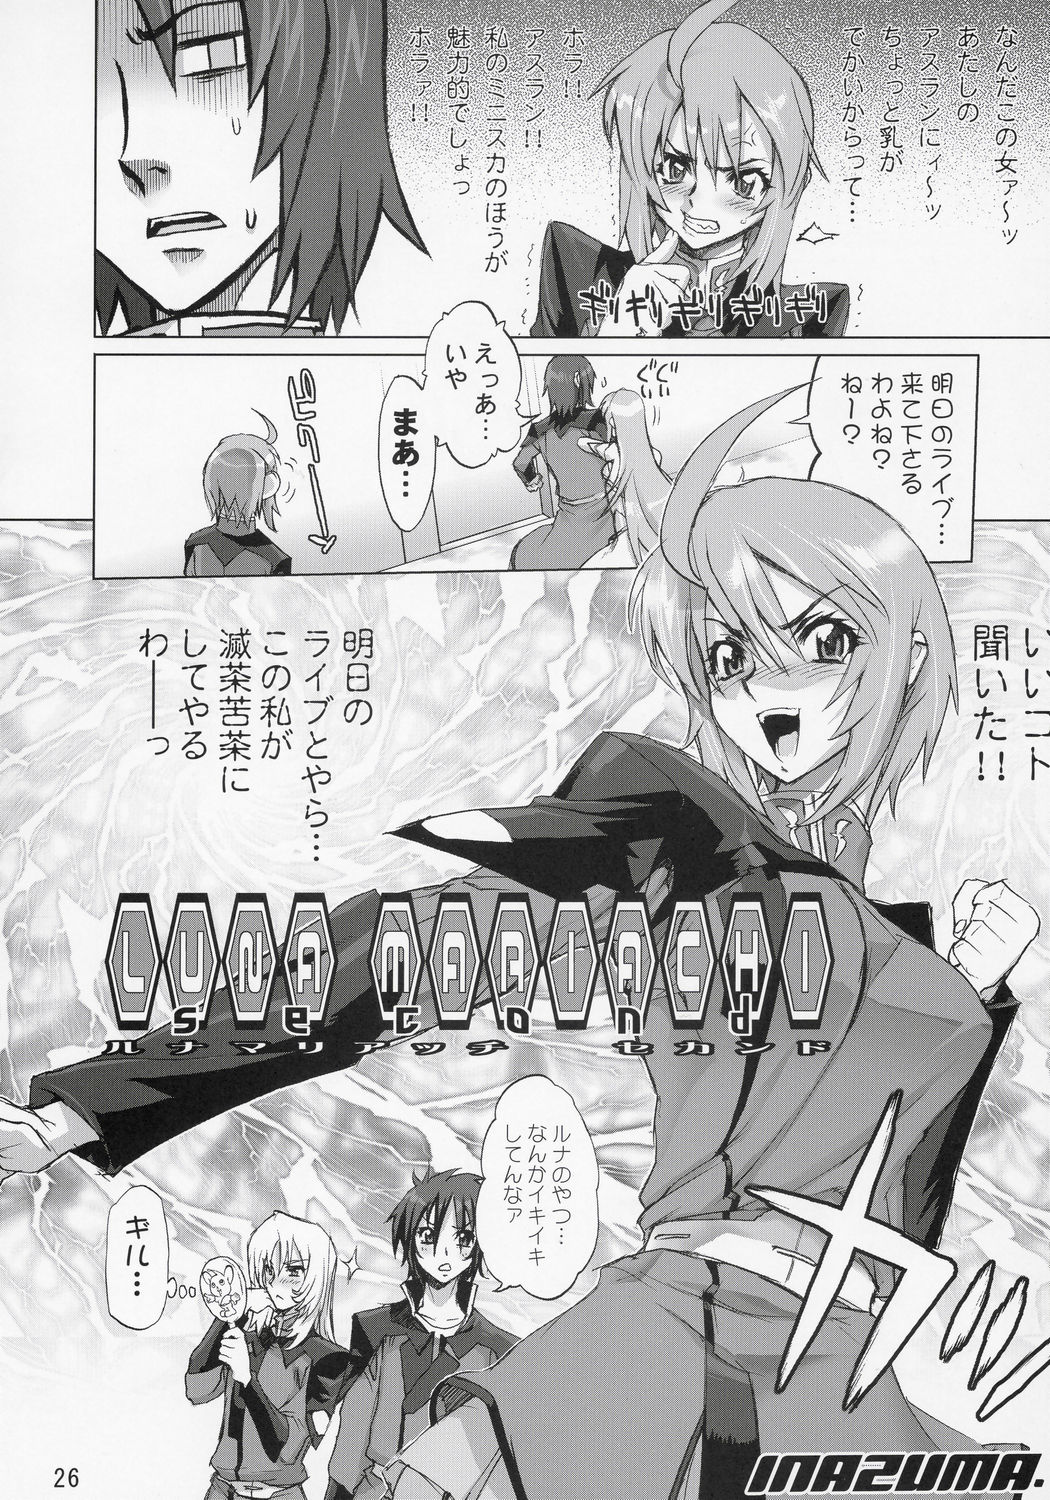 (C69) [Digital Accel Works] Inazuma Warrior 2 (Various) page 25 full